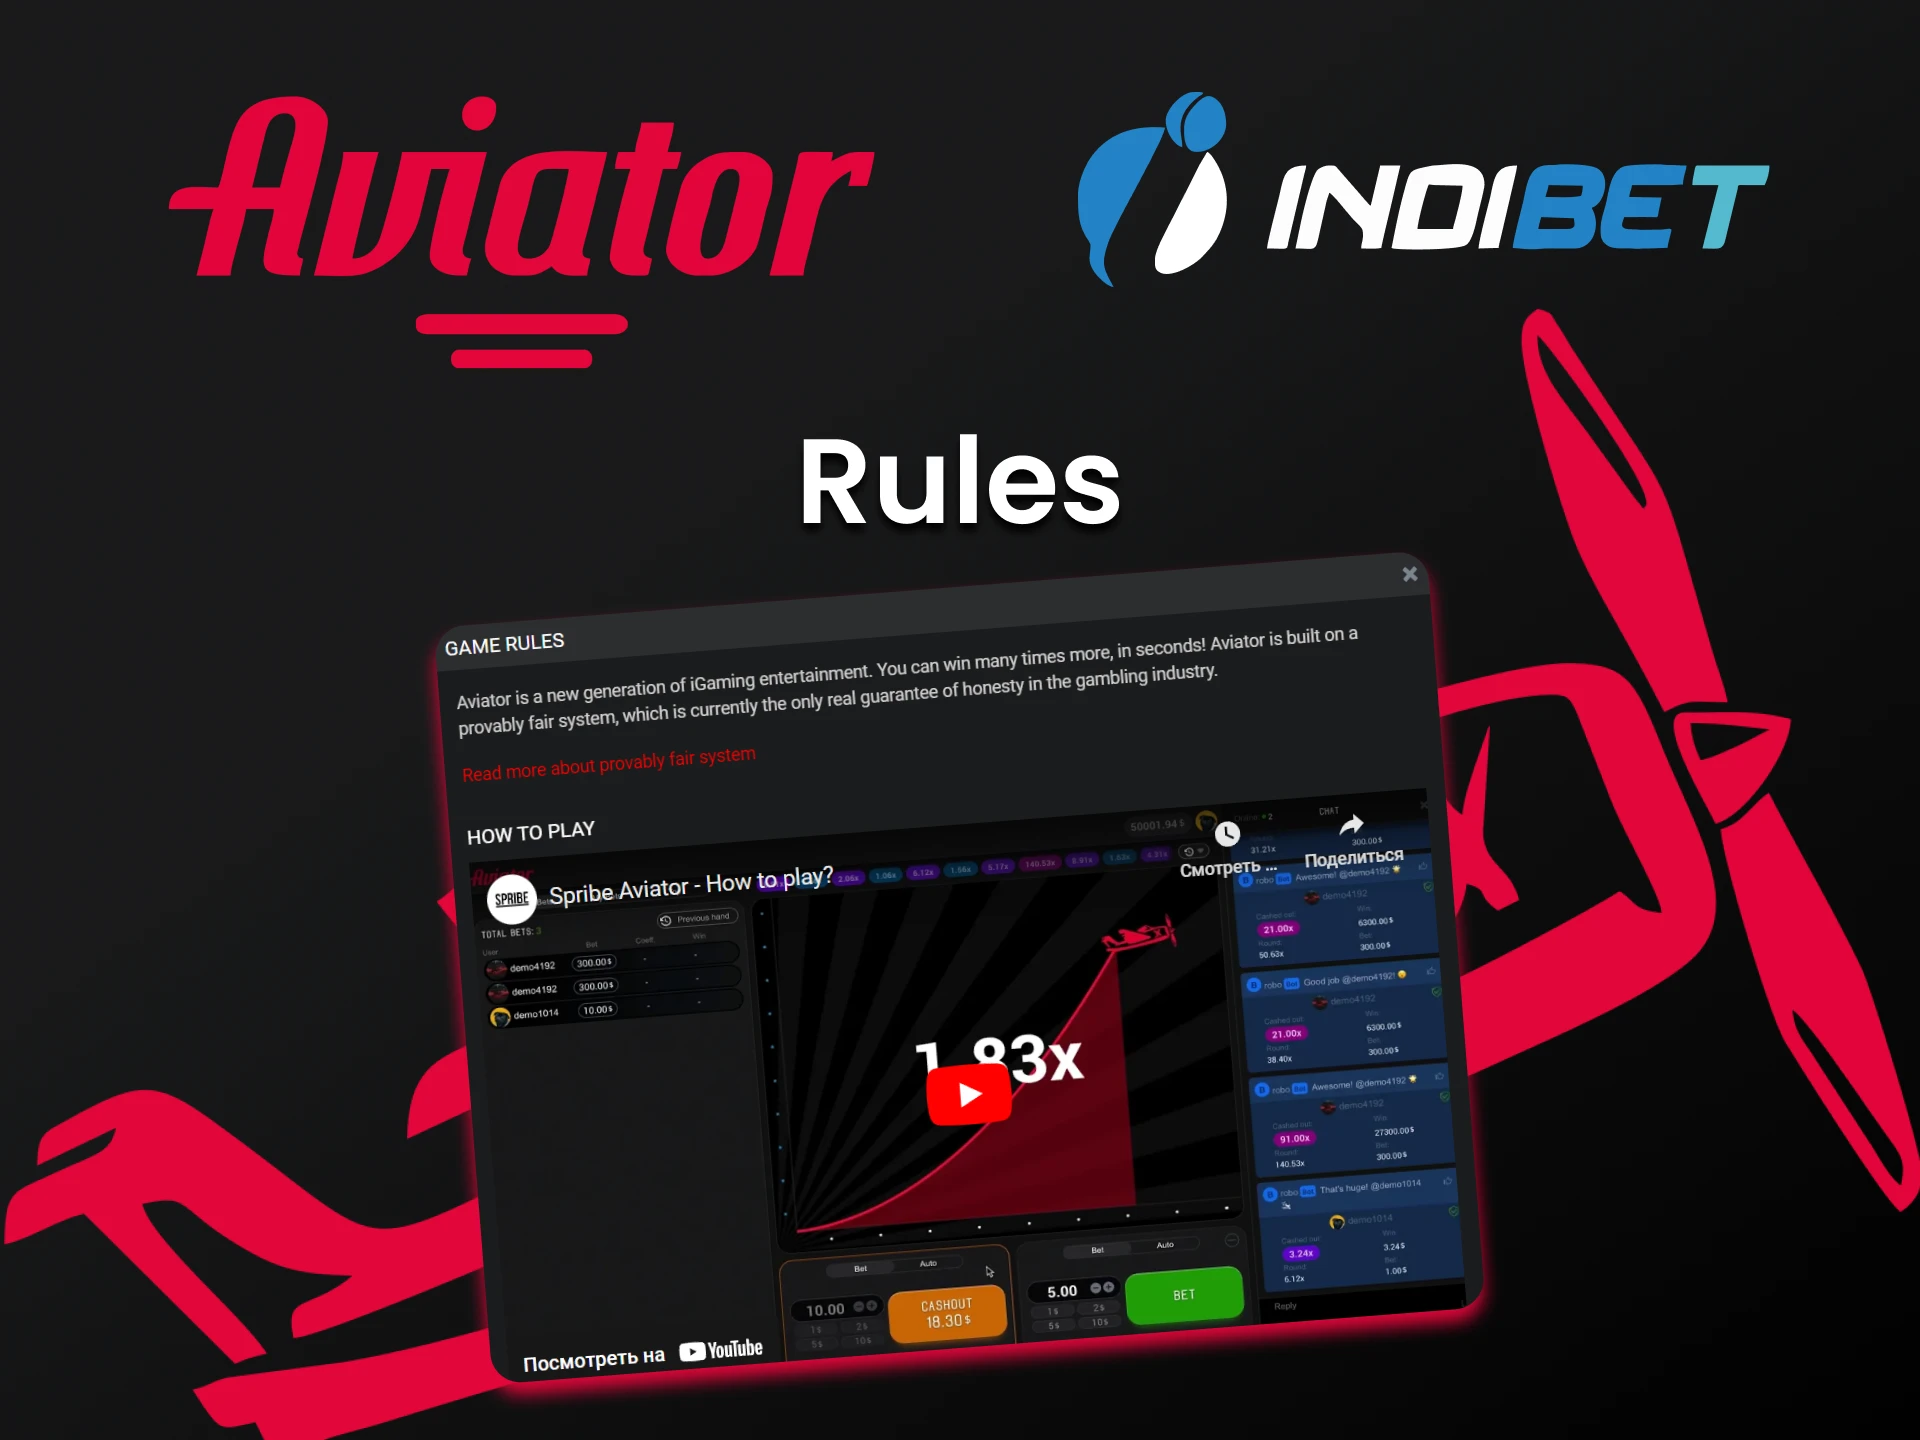 Learn the rules of the Aviator game on Indibet.